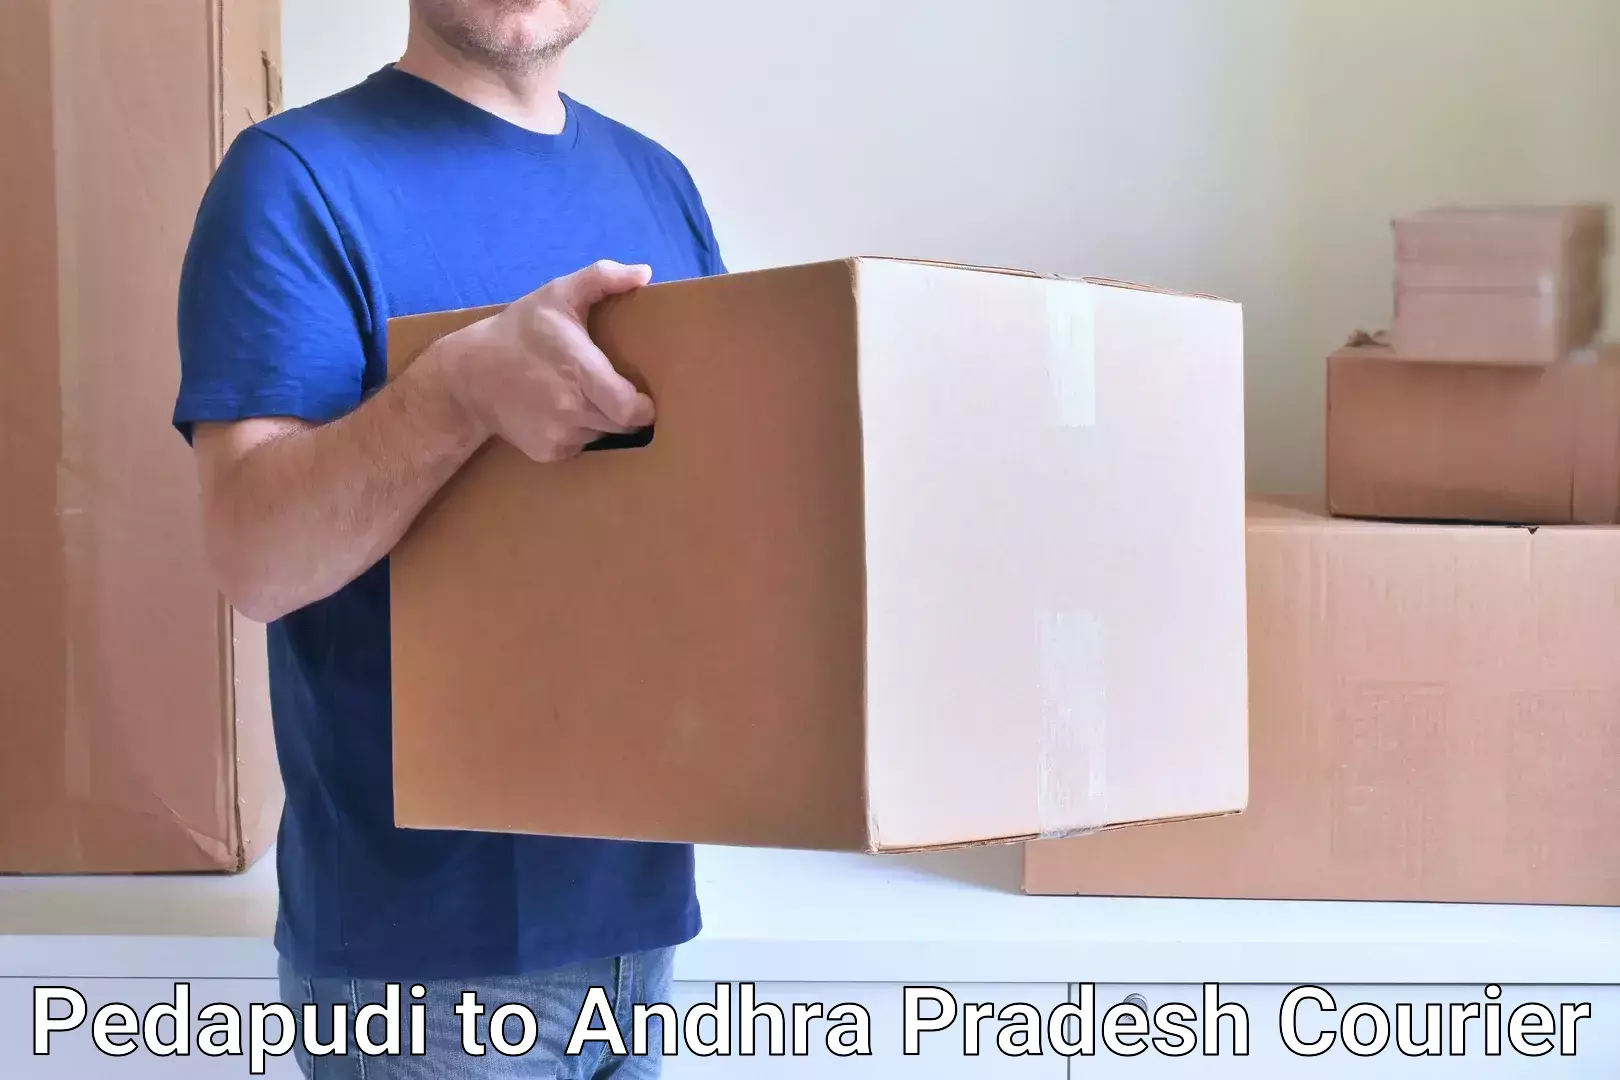 Easy access courier services in Pedapudi to Chagallu